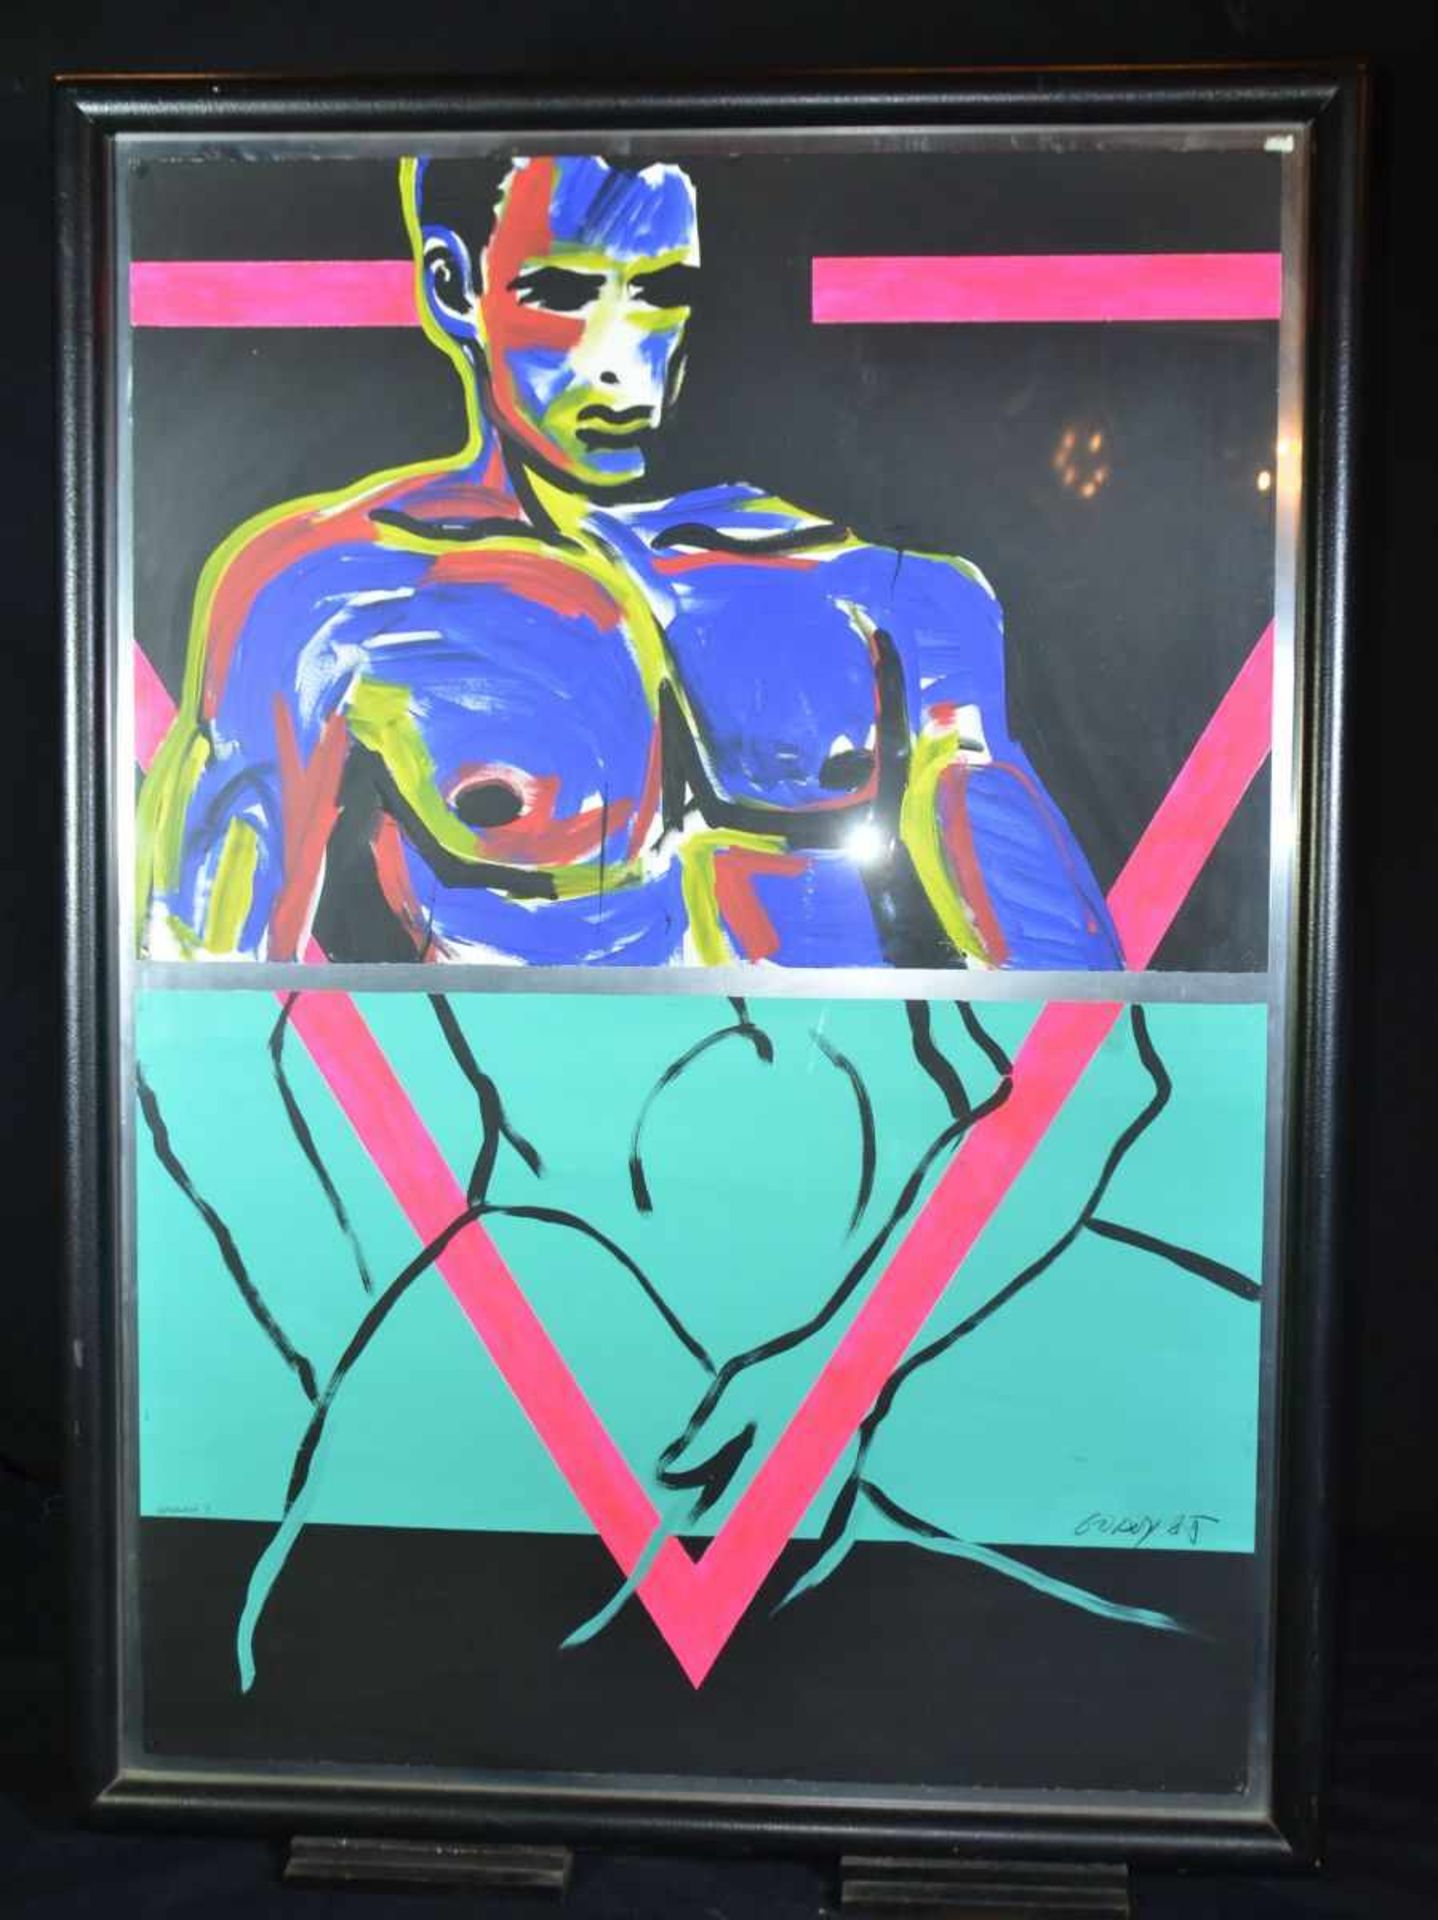 GODLY, Conrad (1962 Davos), "Modern Nude Man", mixed media on 2 sheets of paper, thus mounted on